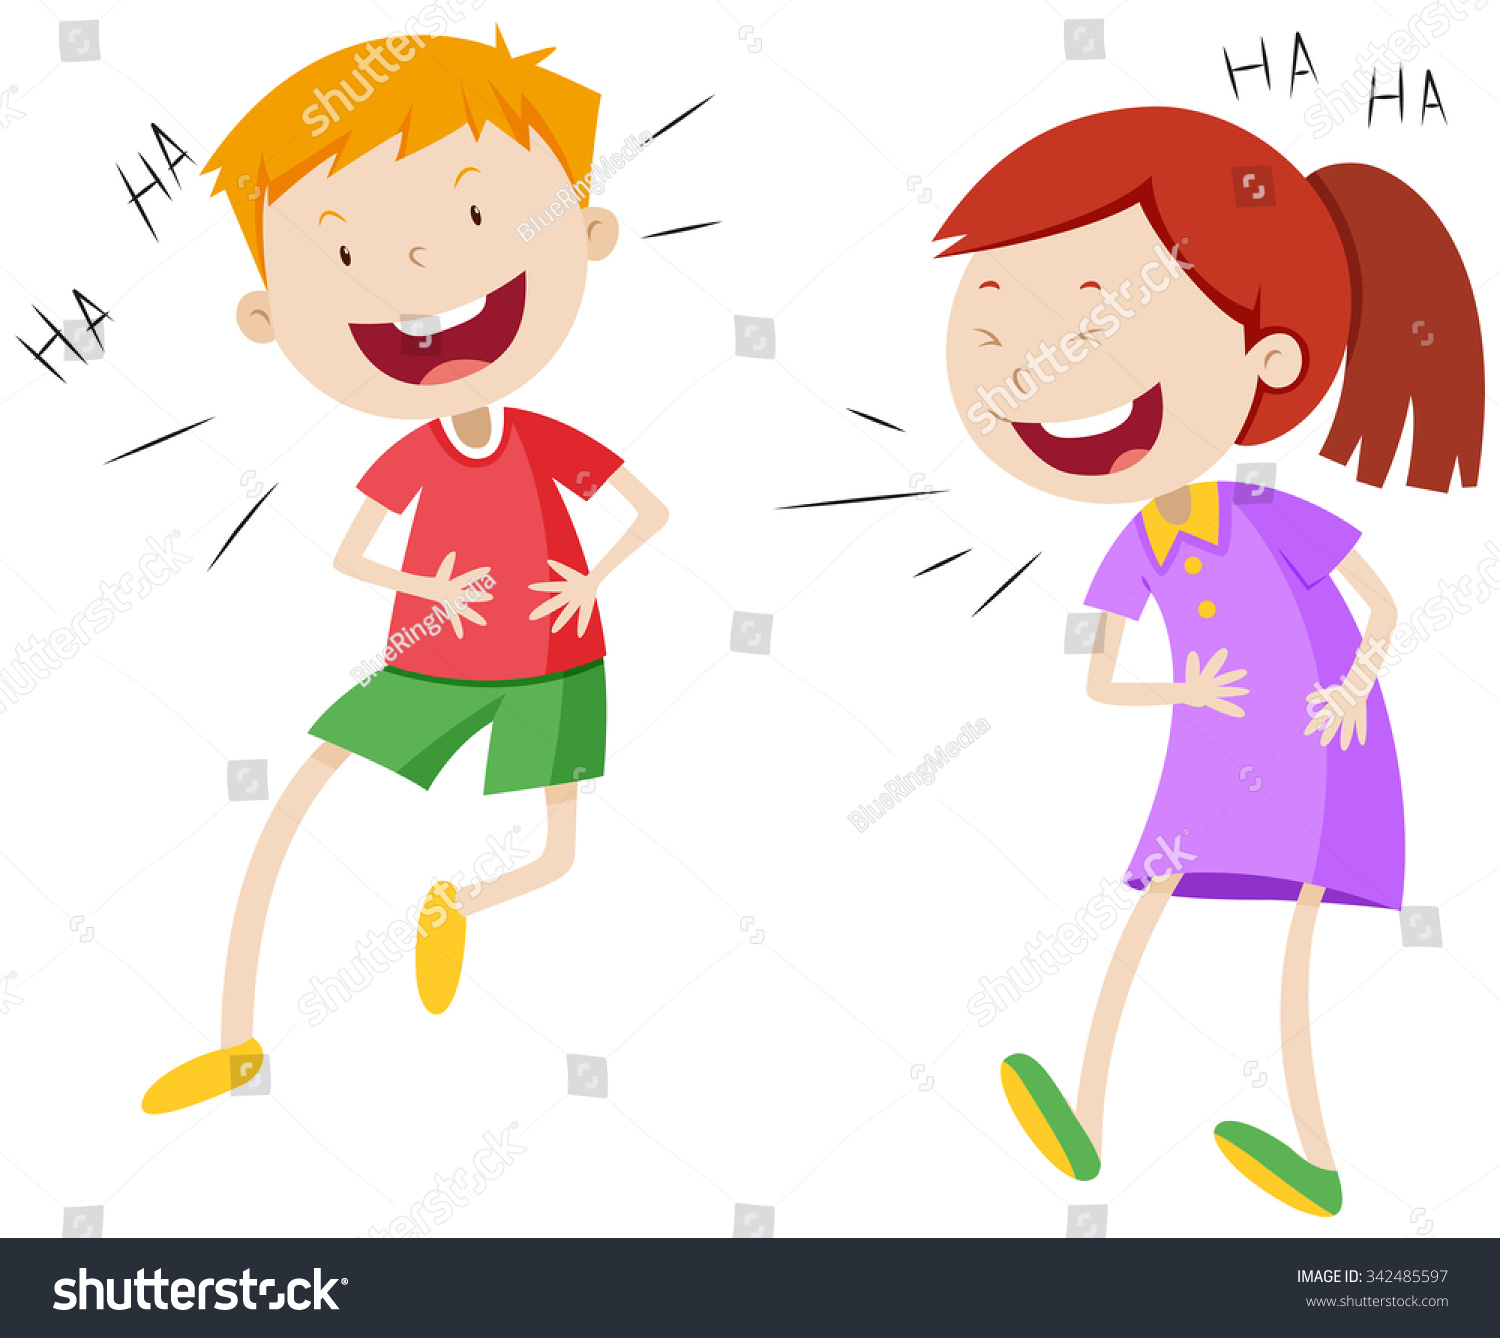 girl laughing clipart - photo #36